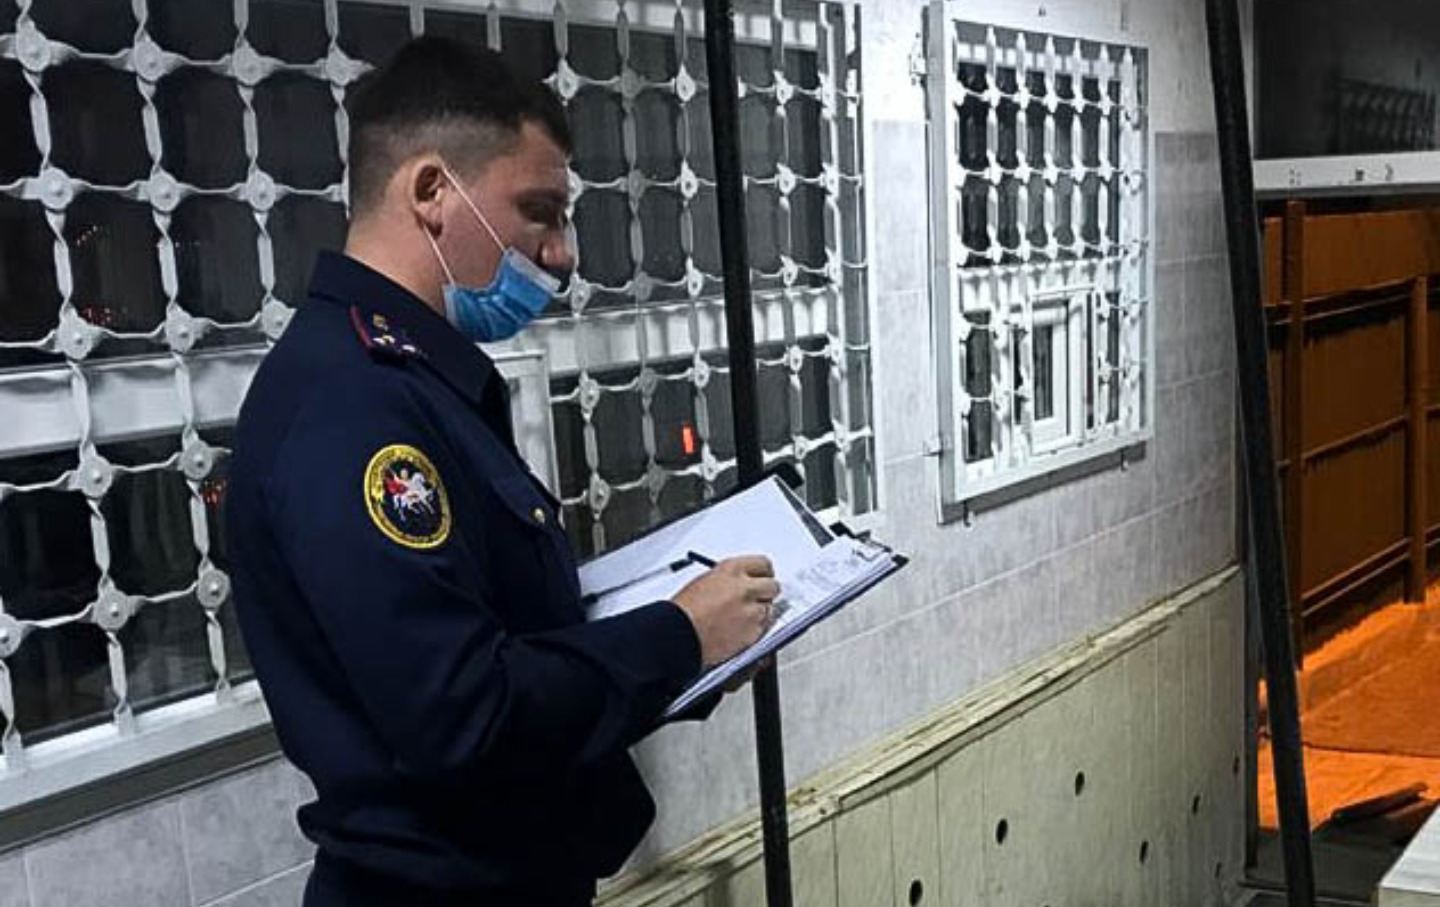 Tuberculosis hospital staff face criminal charges over abuse of convicts in Saratov, Russia